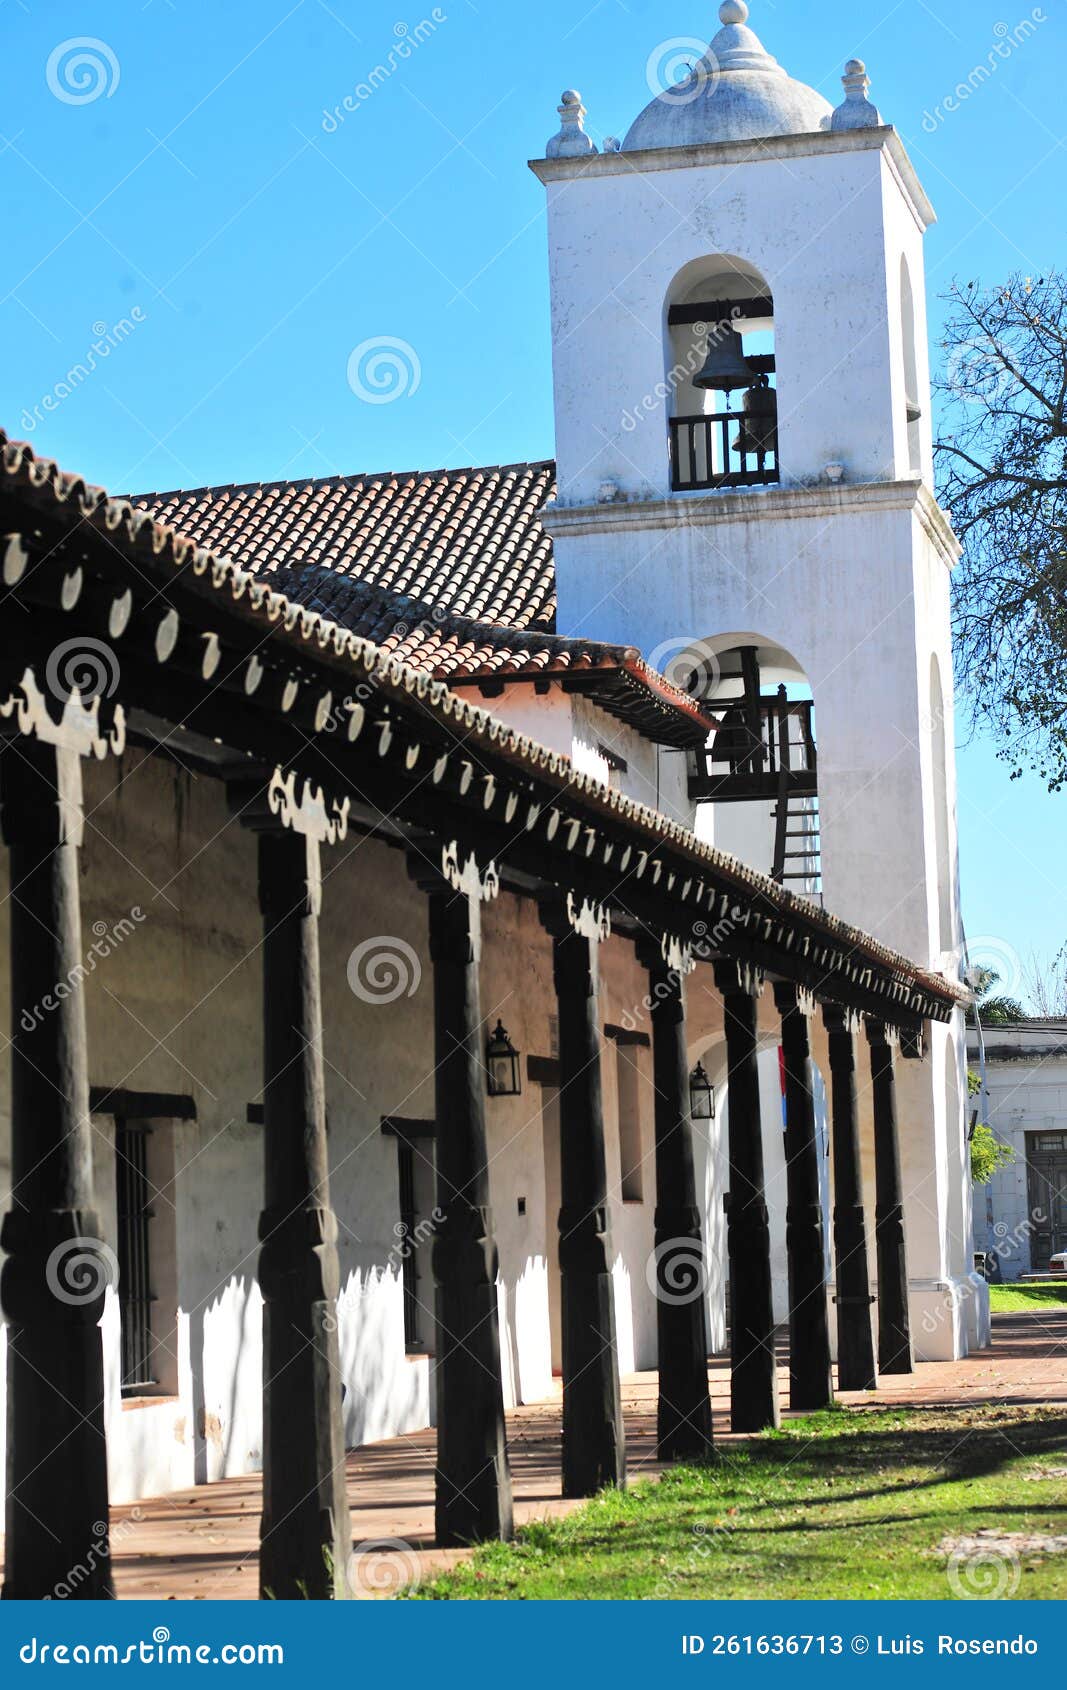 The Convent of San Francisco is a Catholic temple and convent in the city of Santa Fe, Argentina. It occupies a property that formerly covered a block of the historic area and today has been incorporated into the layout of the Plaza de las Tres Culturas in the city, next to the Juan de Garay and Estanislao LÃ³pez museums